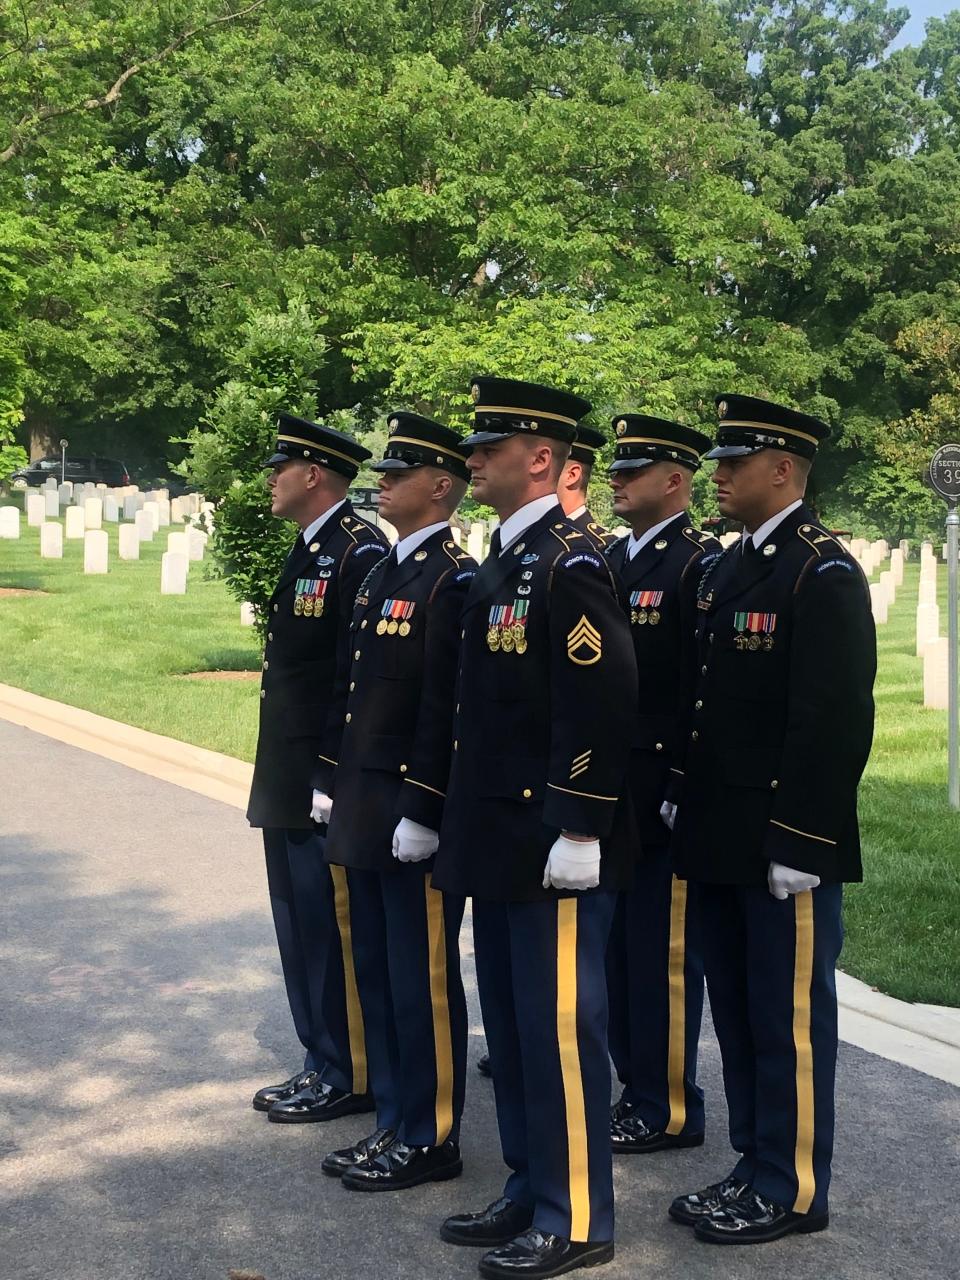 Members of the U.S. Army's Honor Guard stand in attention on May 20 at Arlington National Cemetery.